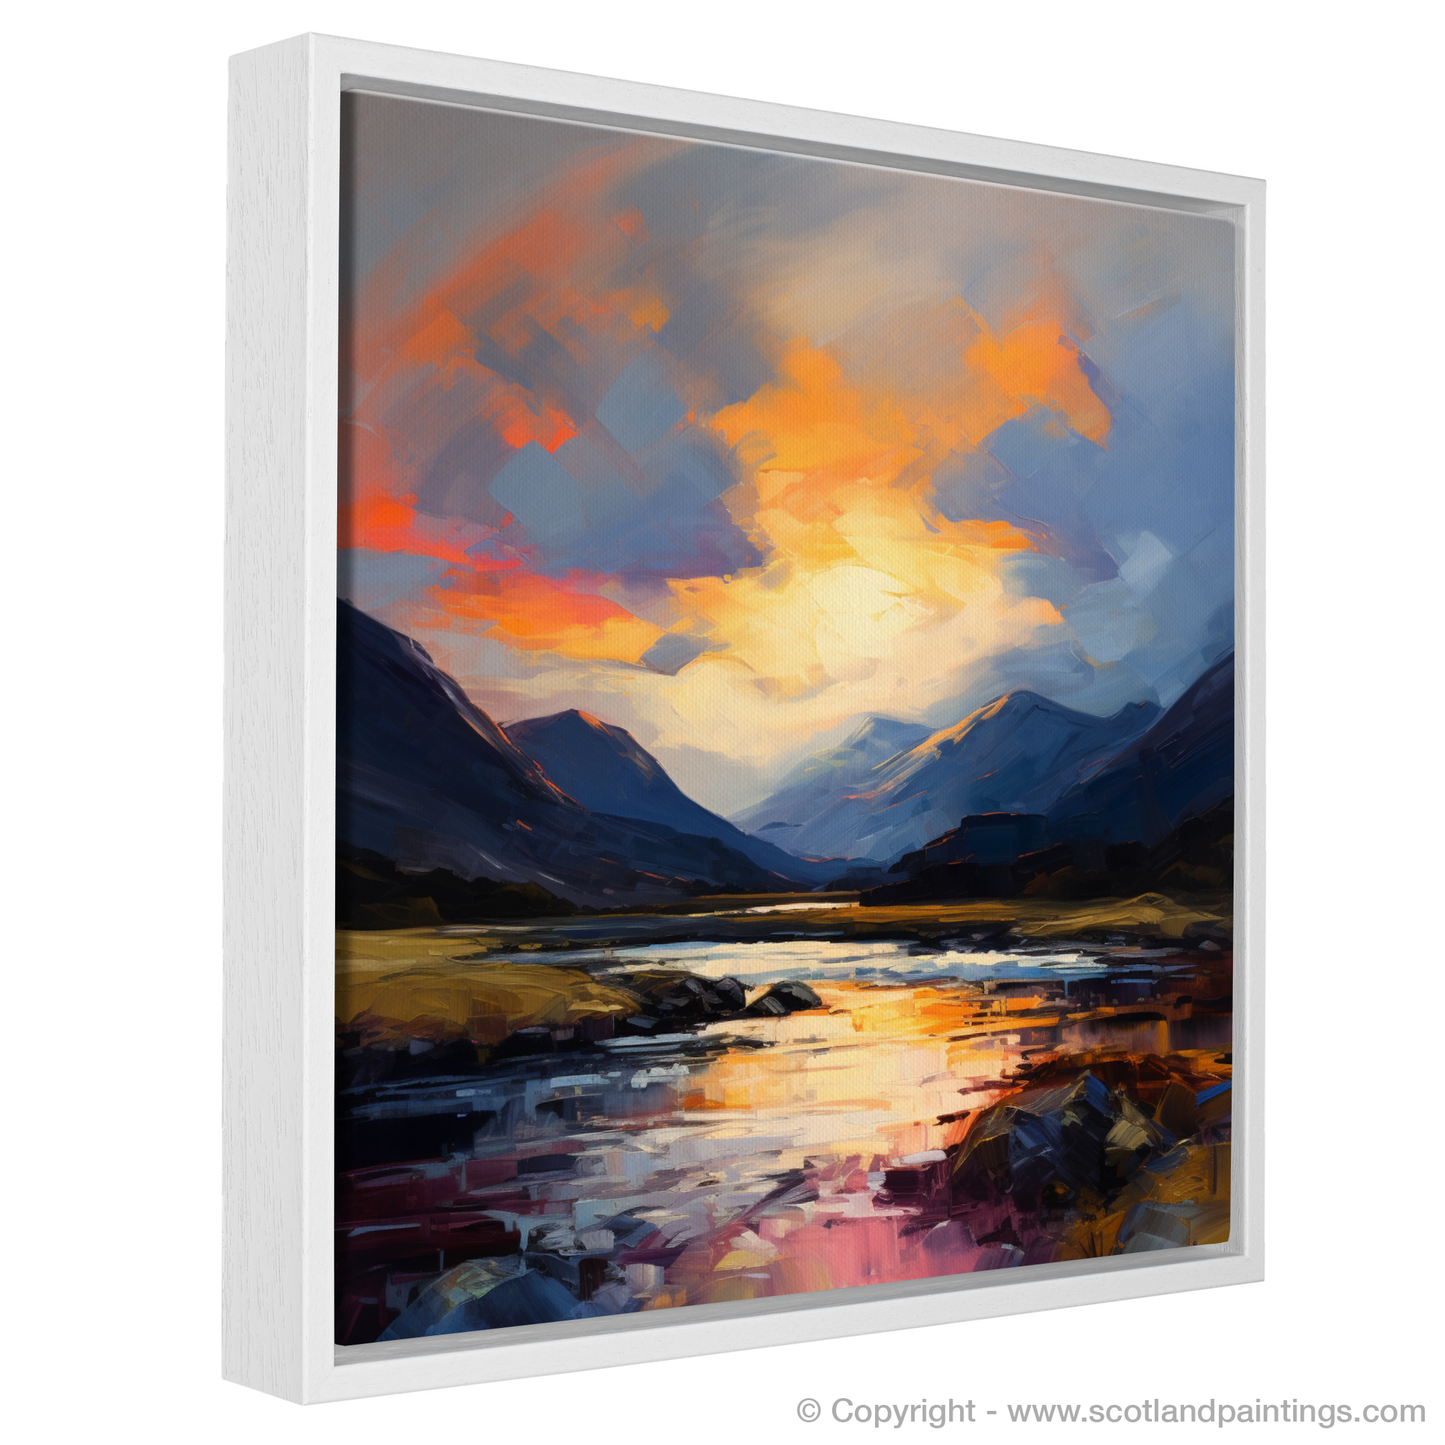 Painting and Art Print of Moody clouds at sunset in Glencoe entitled "Sunset Fury Over Glencoe".